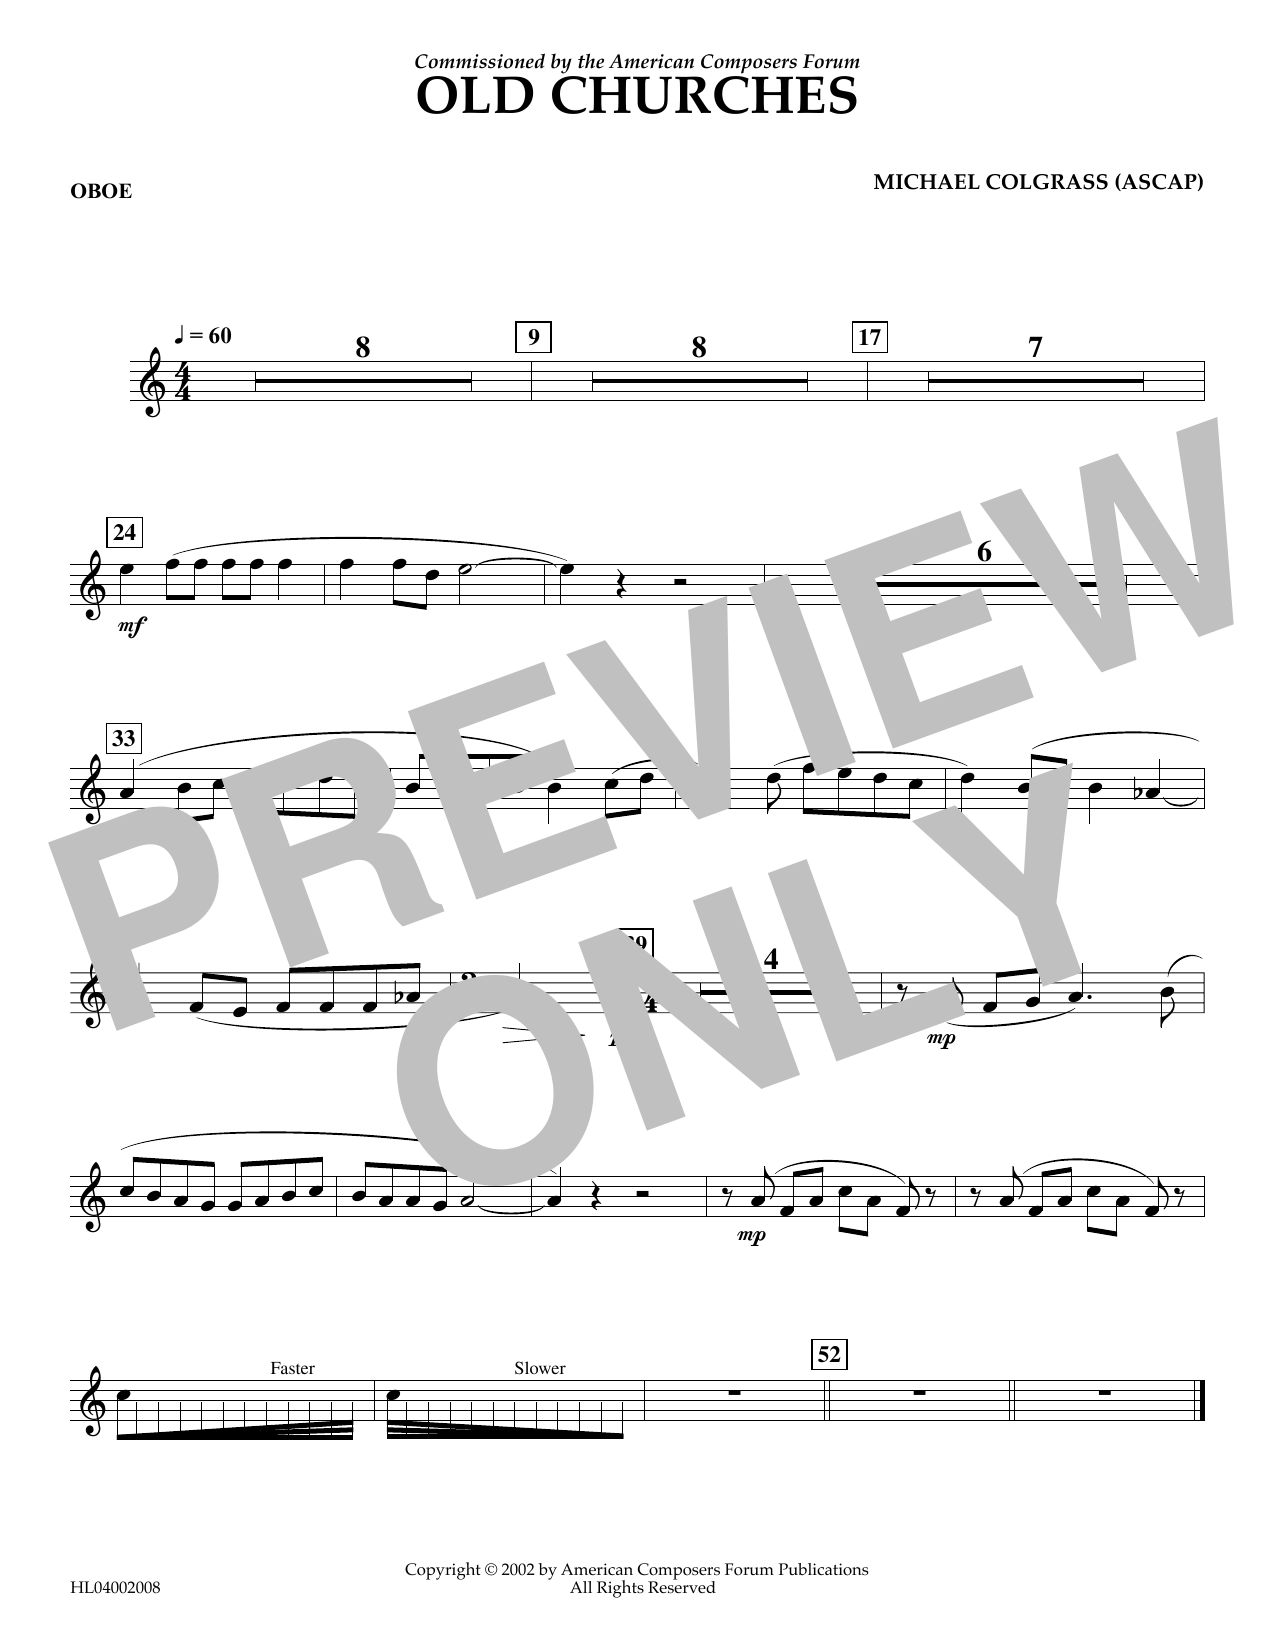 Download Michael Colgrass Old Churches - Oboe Sheet Music